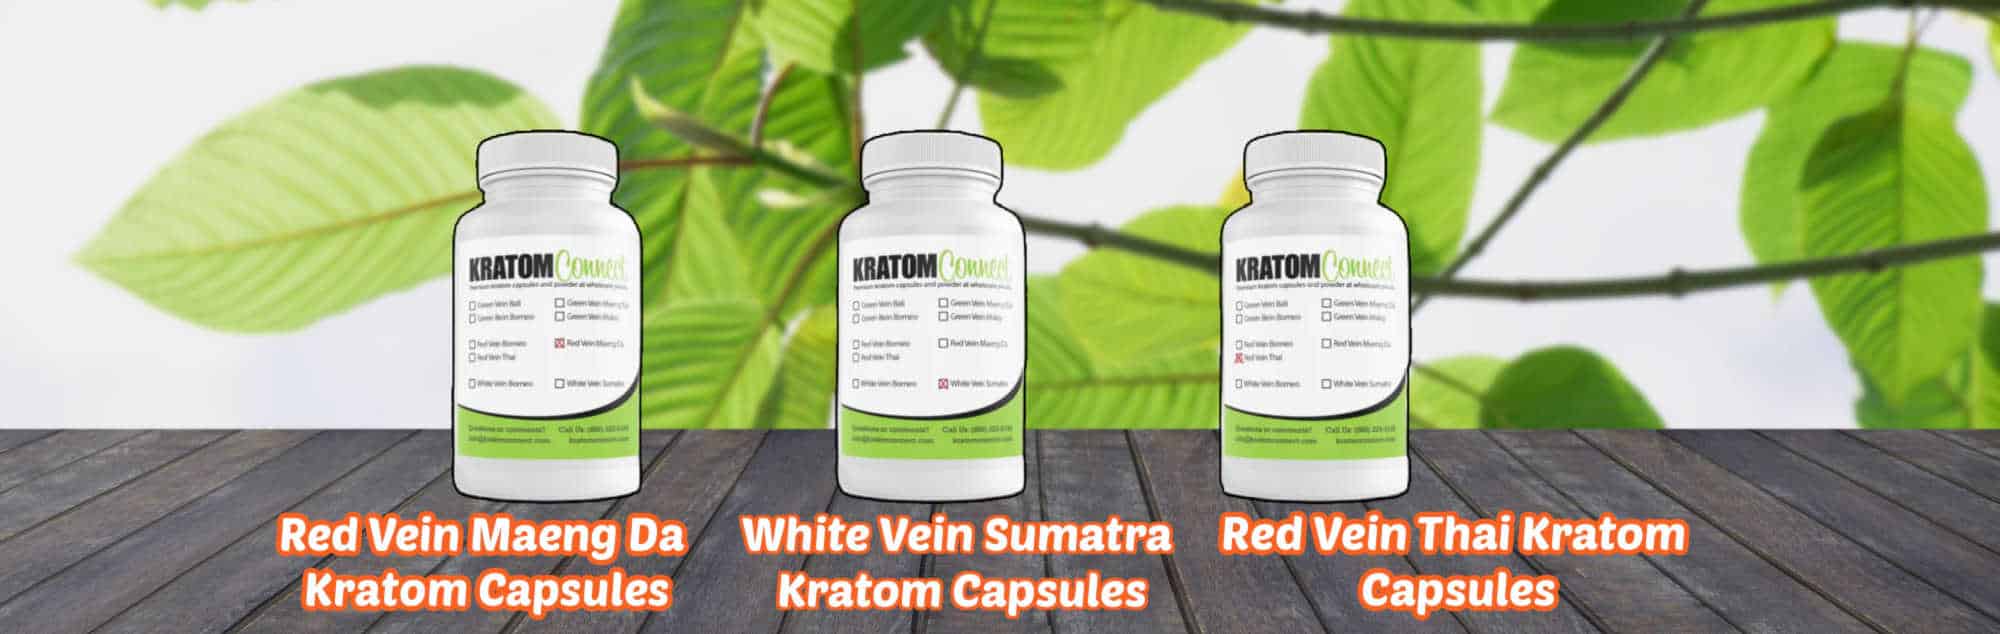 image of what kratom connect has to offer